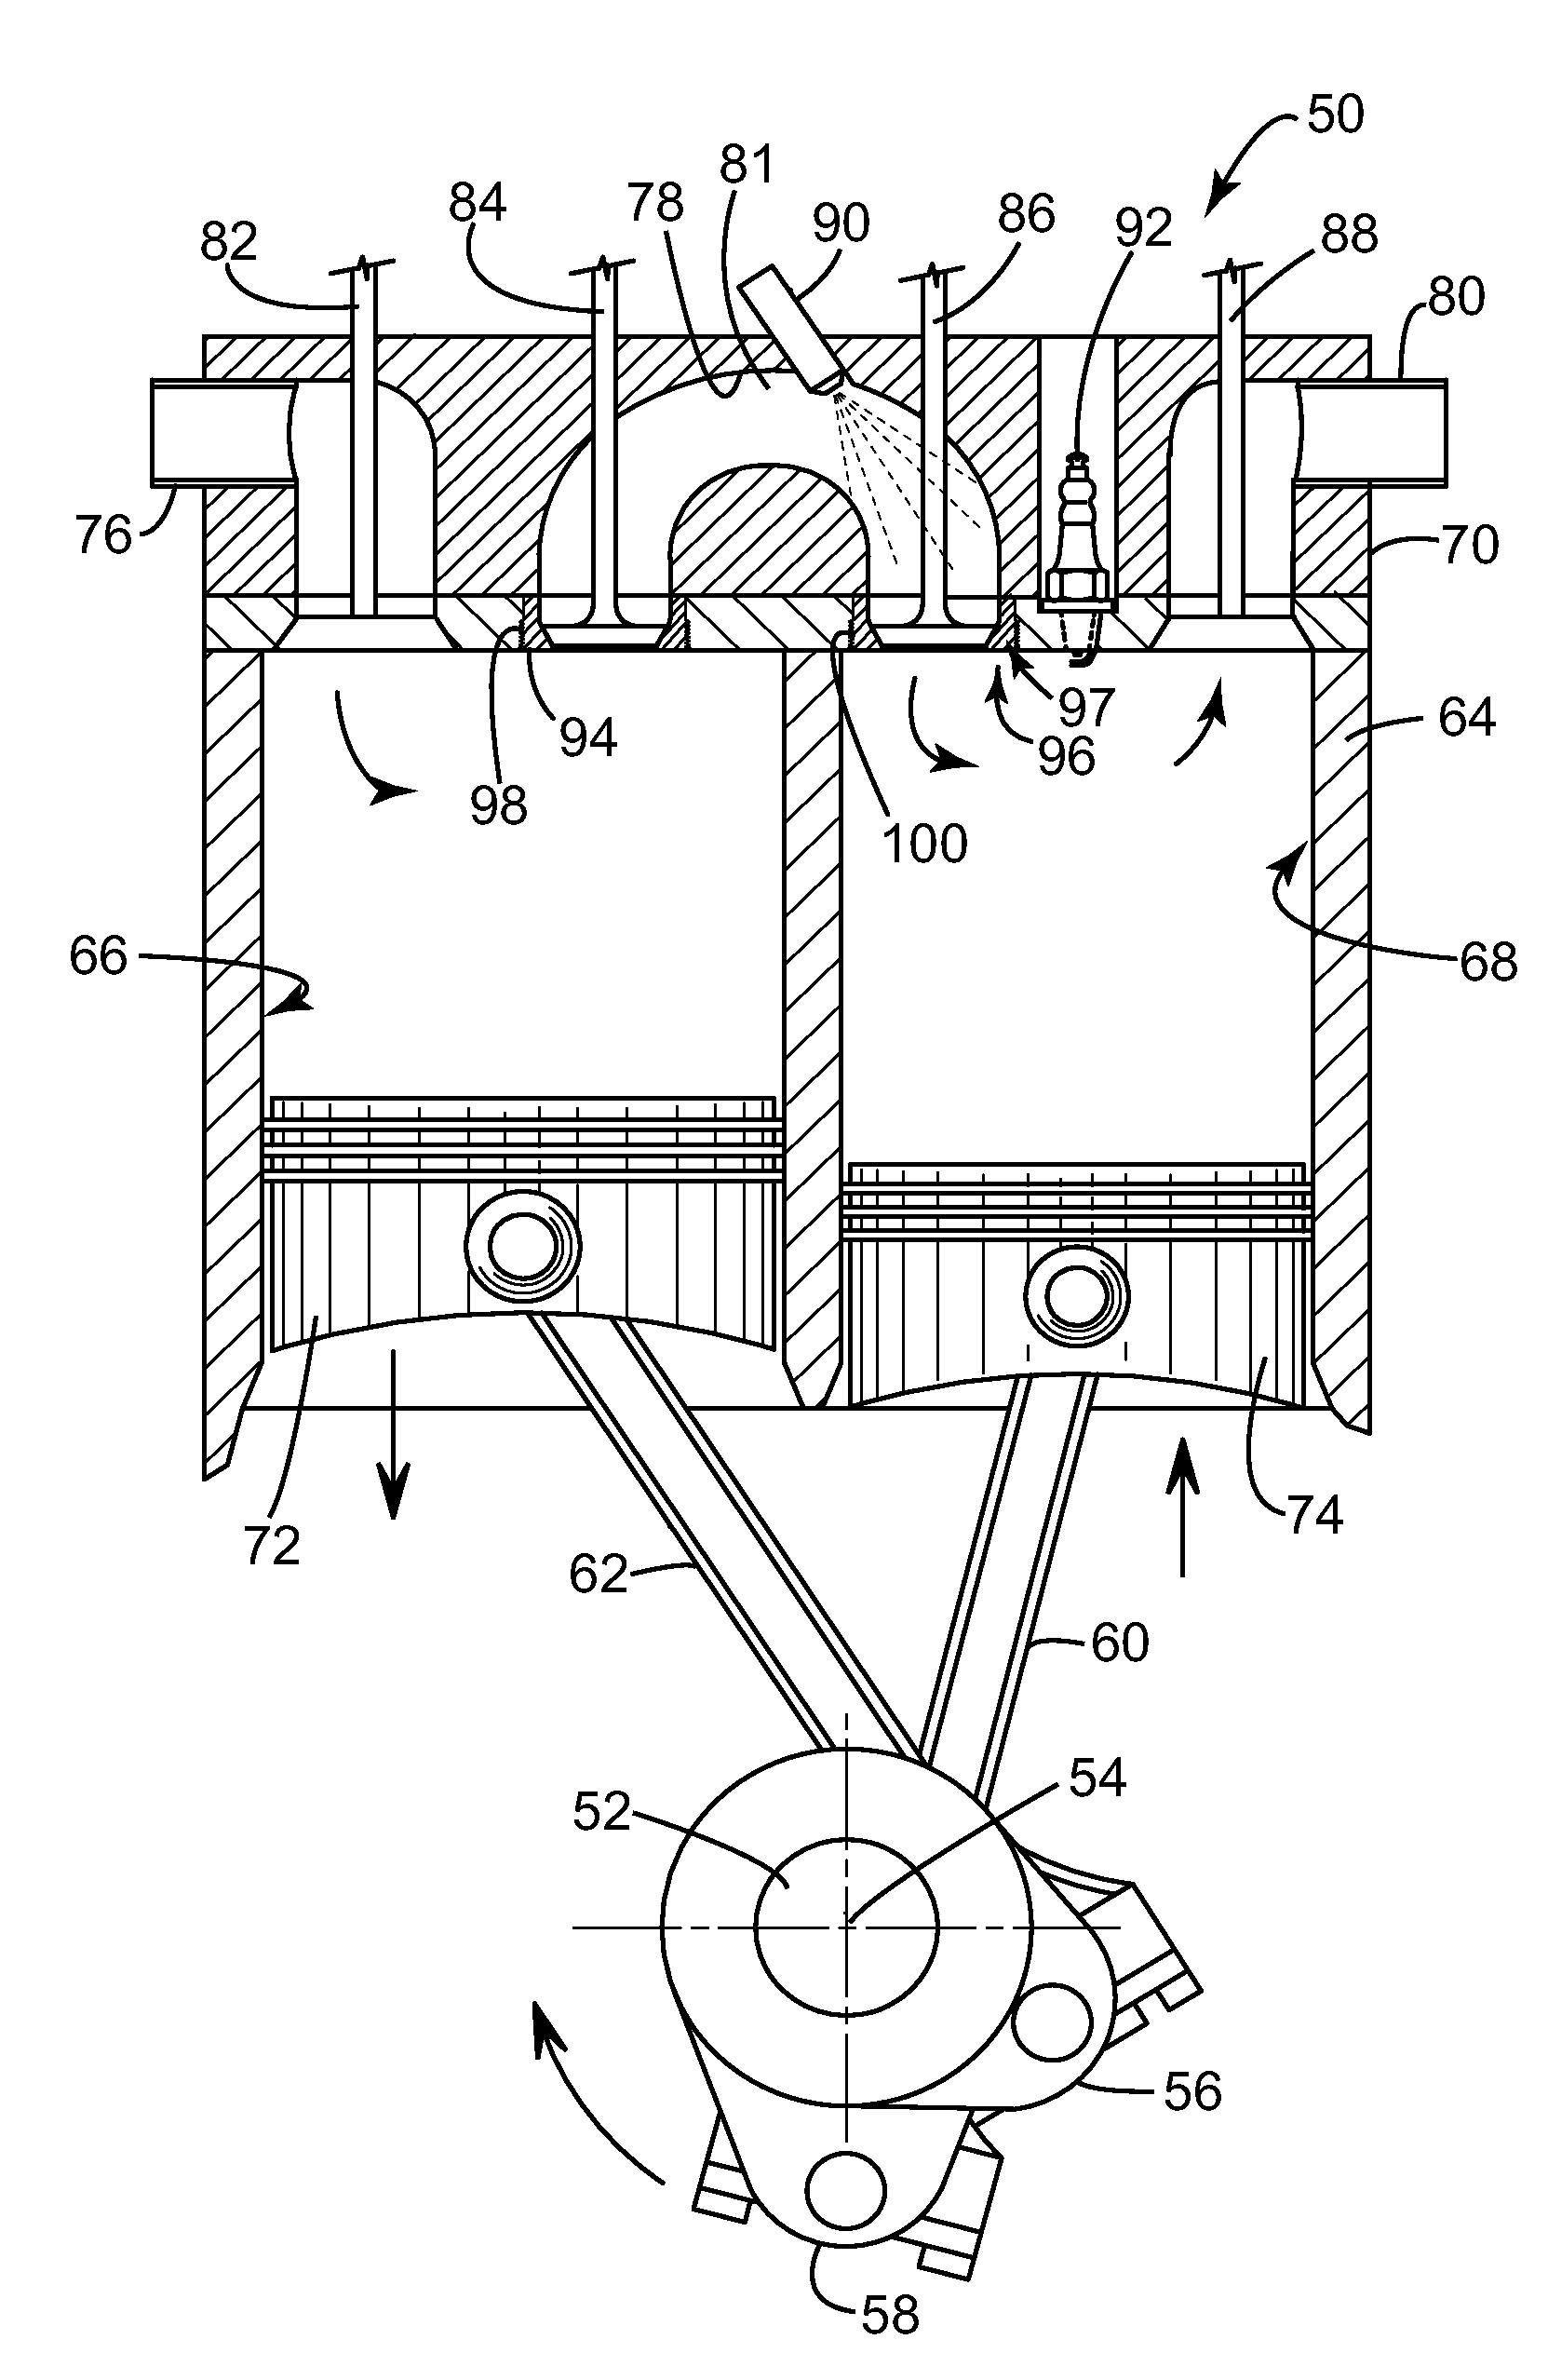 Valve Seat Insert for a Split-Cycle Engine